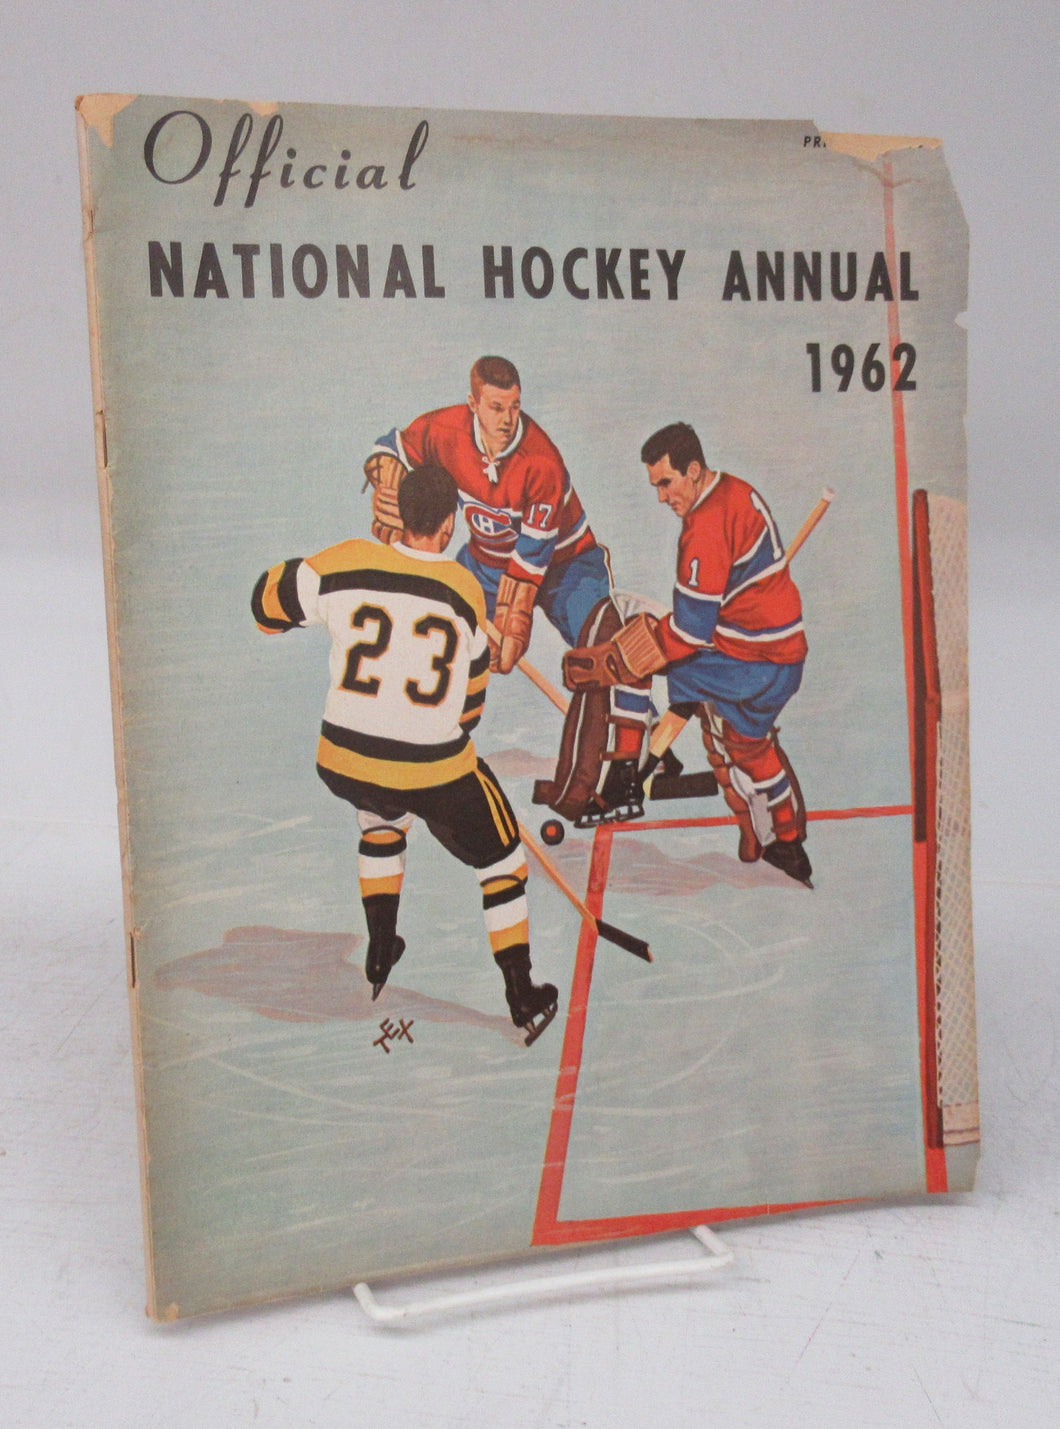 The Official National Hockey Annual 1962